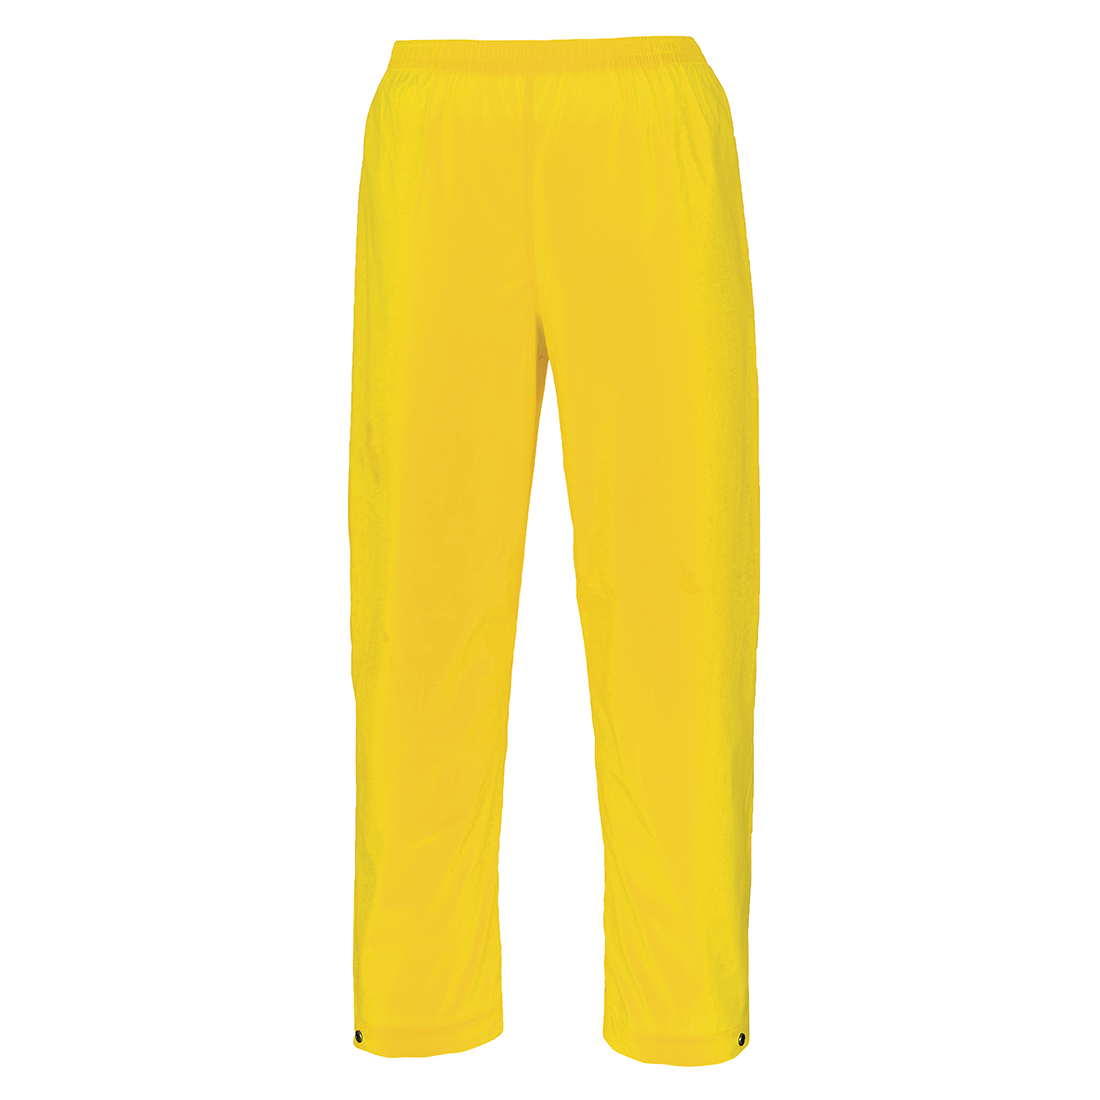 Sealtex Ocean Trousers, Yellow     Size Large R/Fit